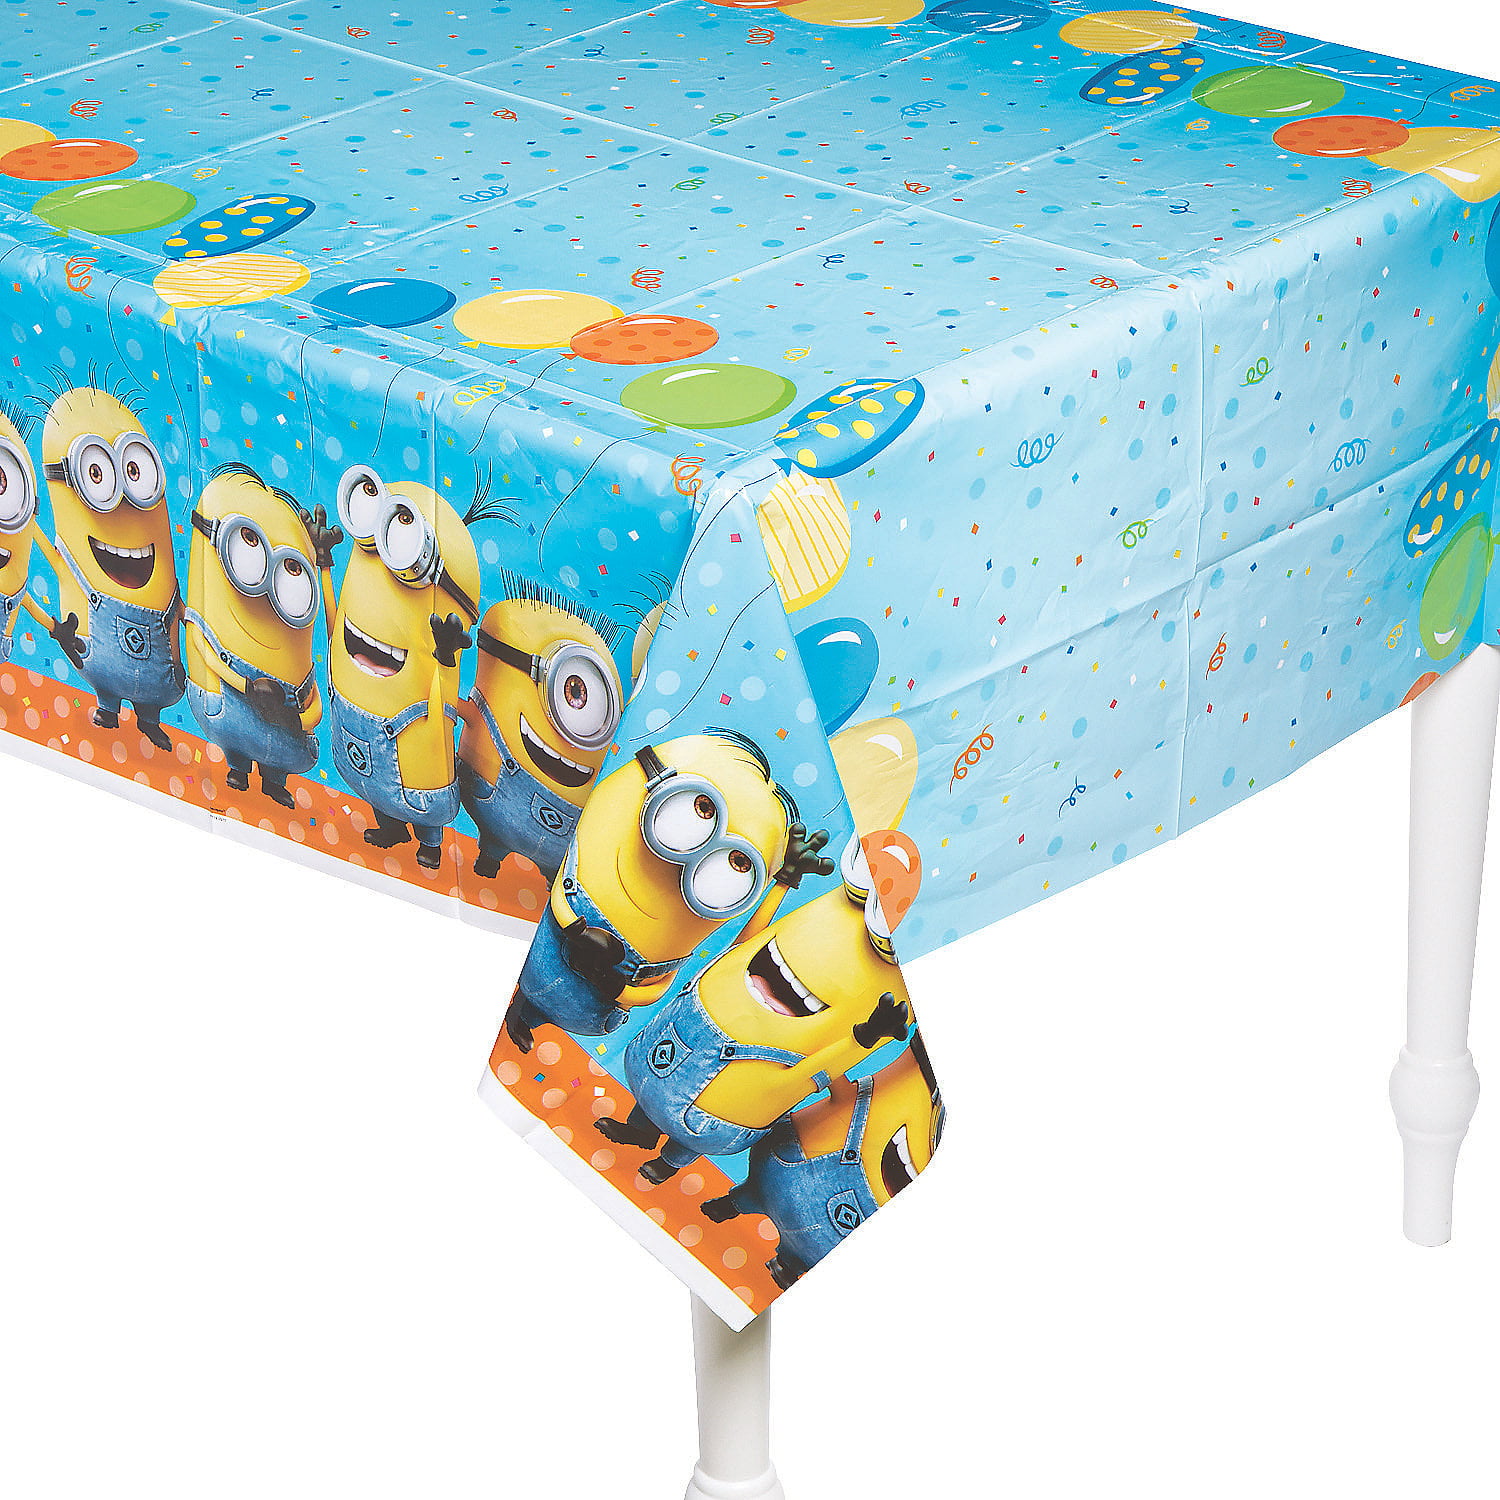 Despicable Me 3 Minions Birthday Party Table Cover 54" x 84" Free Shipping